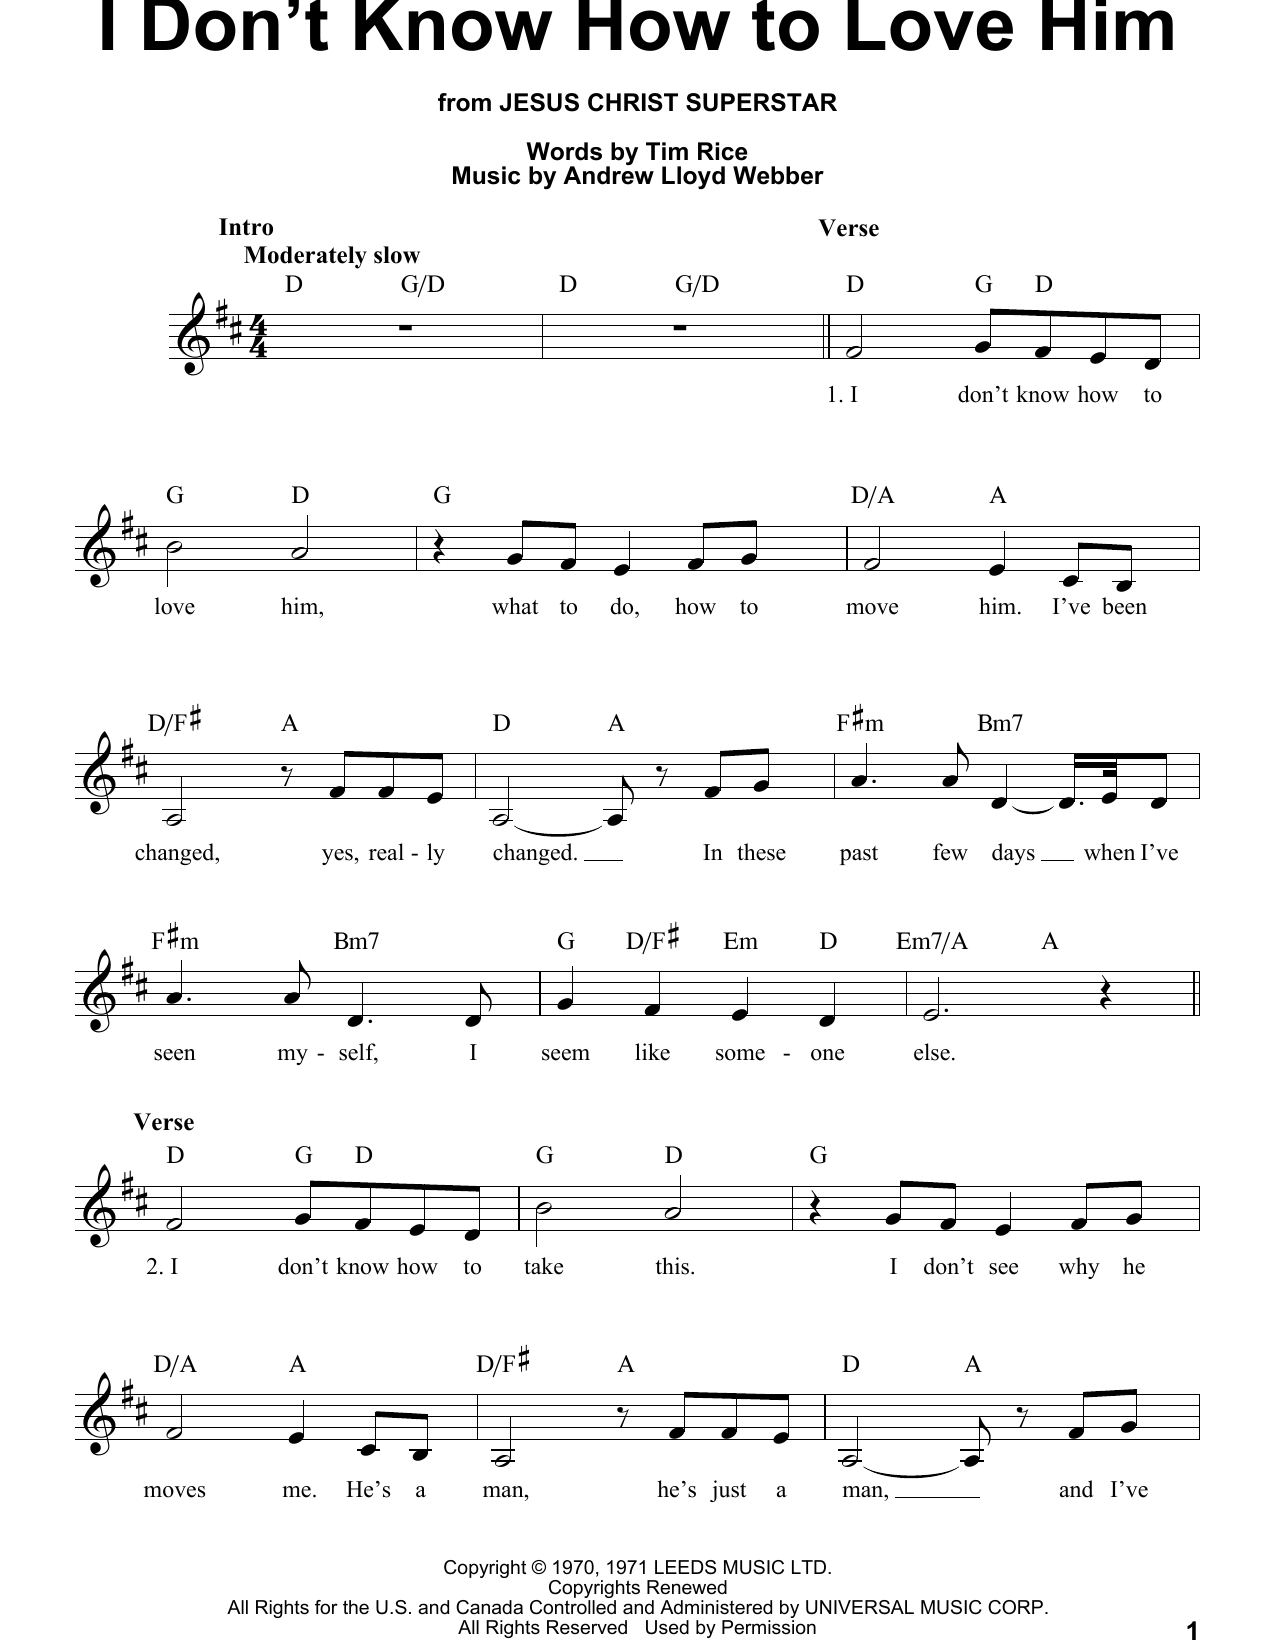 Download Andrew Lloyd Webber I Don't Know How To Love Him Sheet Music